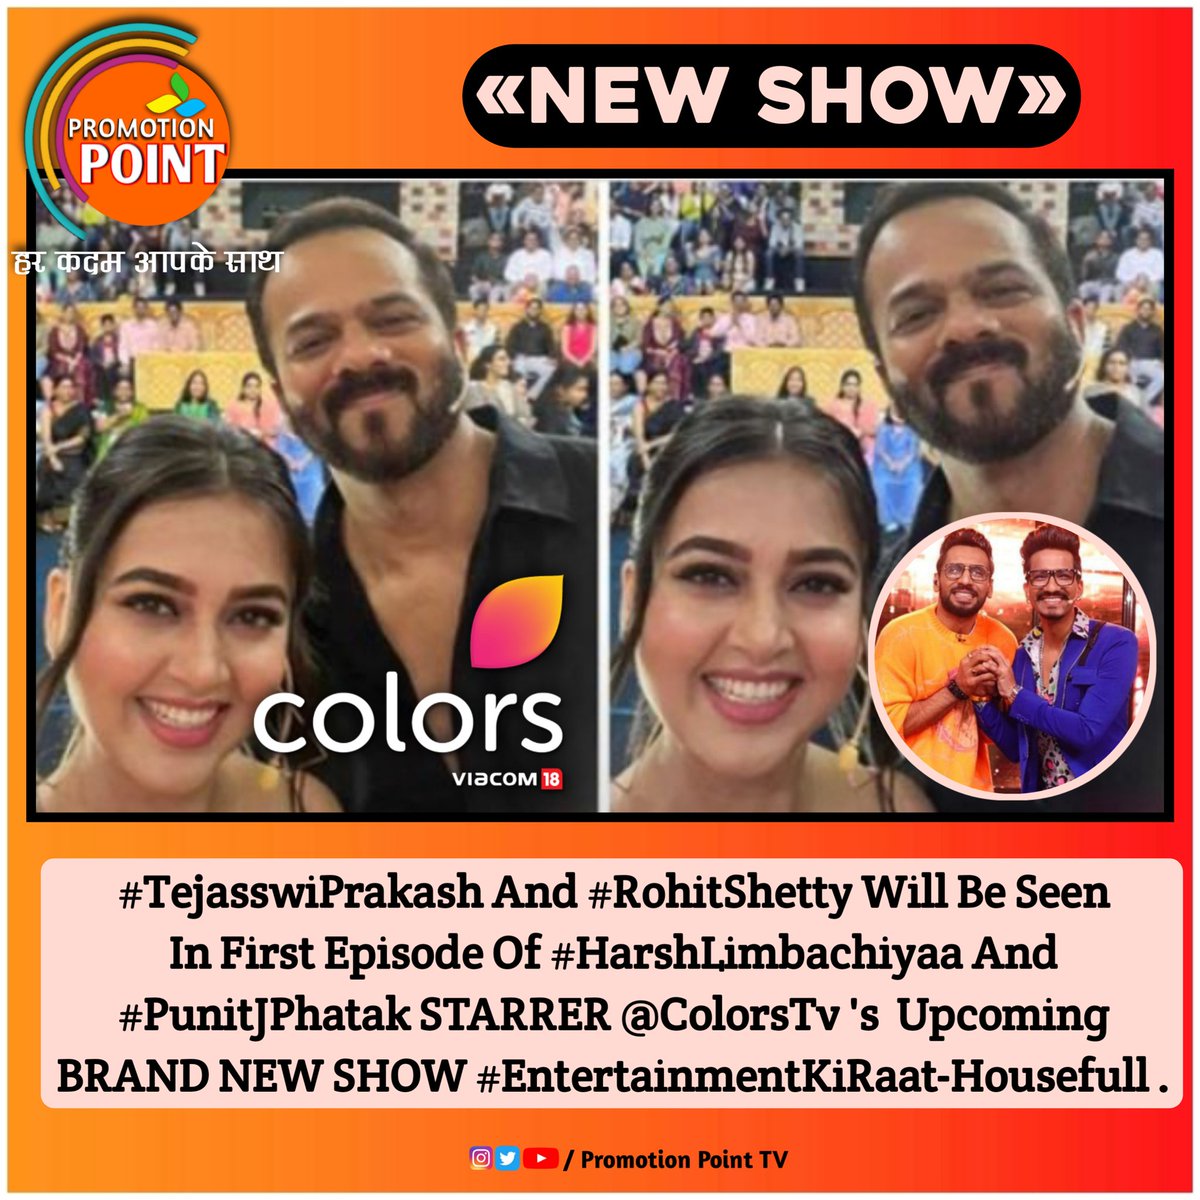 #SuperExclusive

#TejasswiPrakash And #RohitShetty Will Be Seen In First Episode Of #HarshLimbachiyaa And #PunitJPhatak STARRER @ColorsTv 's  Upcoming BRAND NEW SHOW #EntertainmentKiRaat-Housefull . 

@PPtvOfficial EXCLUSIVE